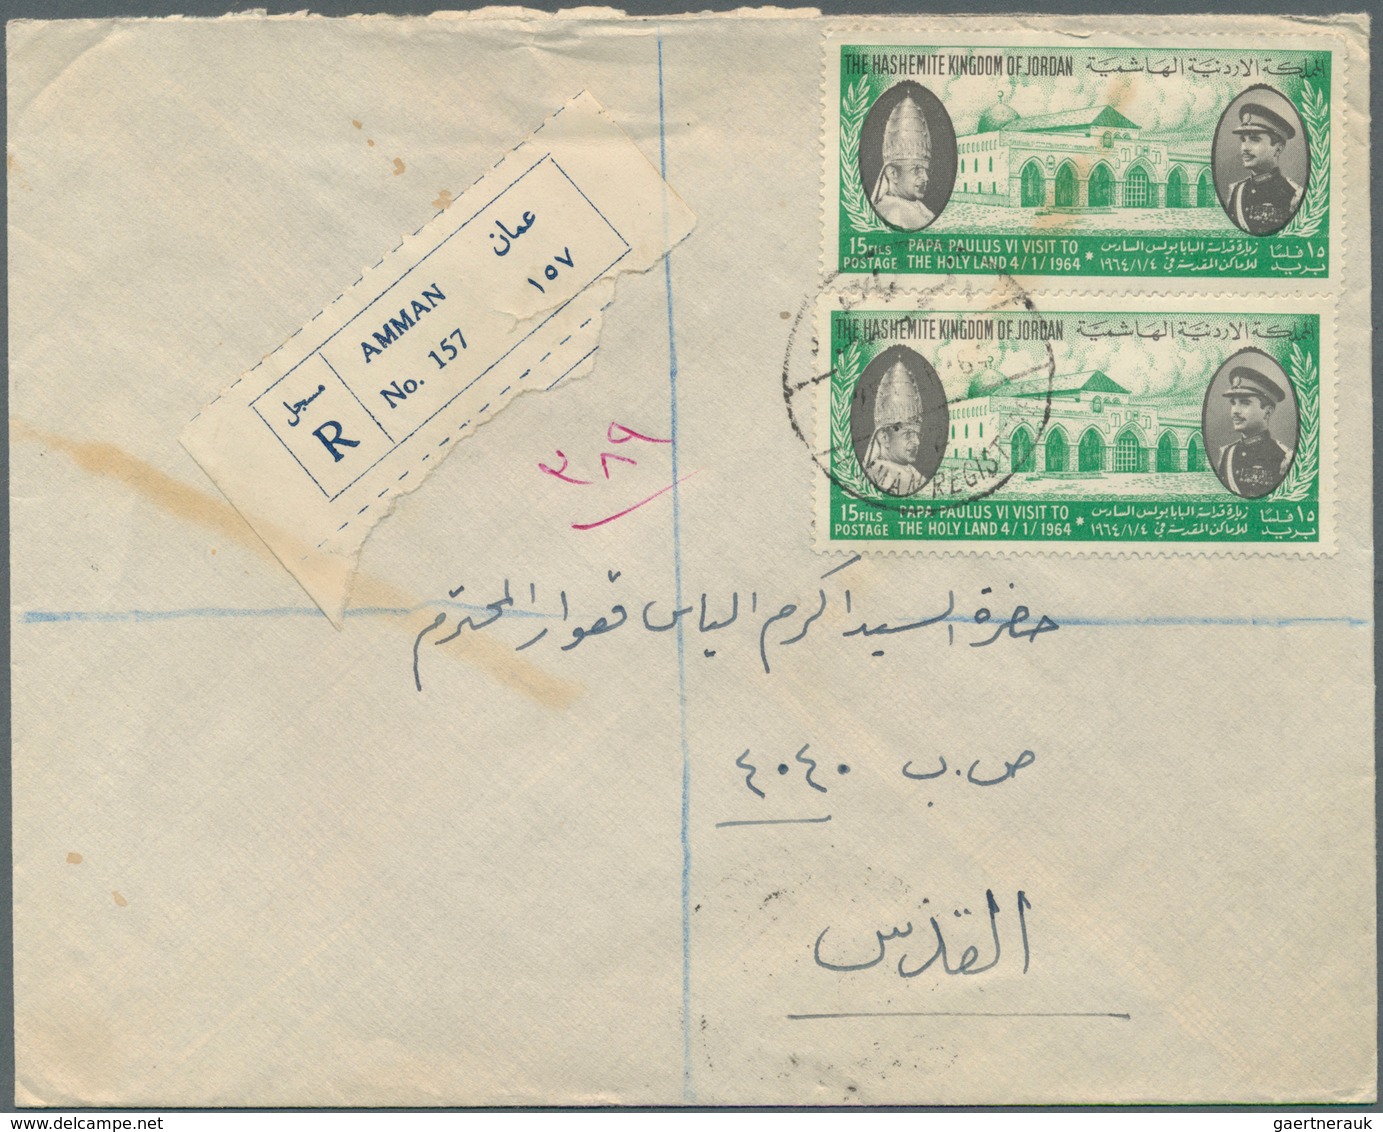 Jordanien: 1925-60, Box containing "Transjordan Cancellations Collection" on 1677 covers, most Amman